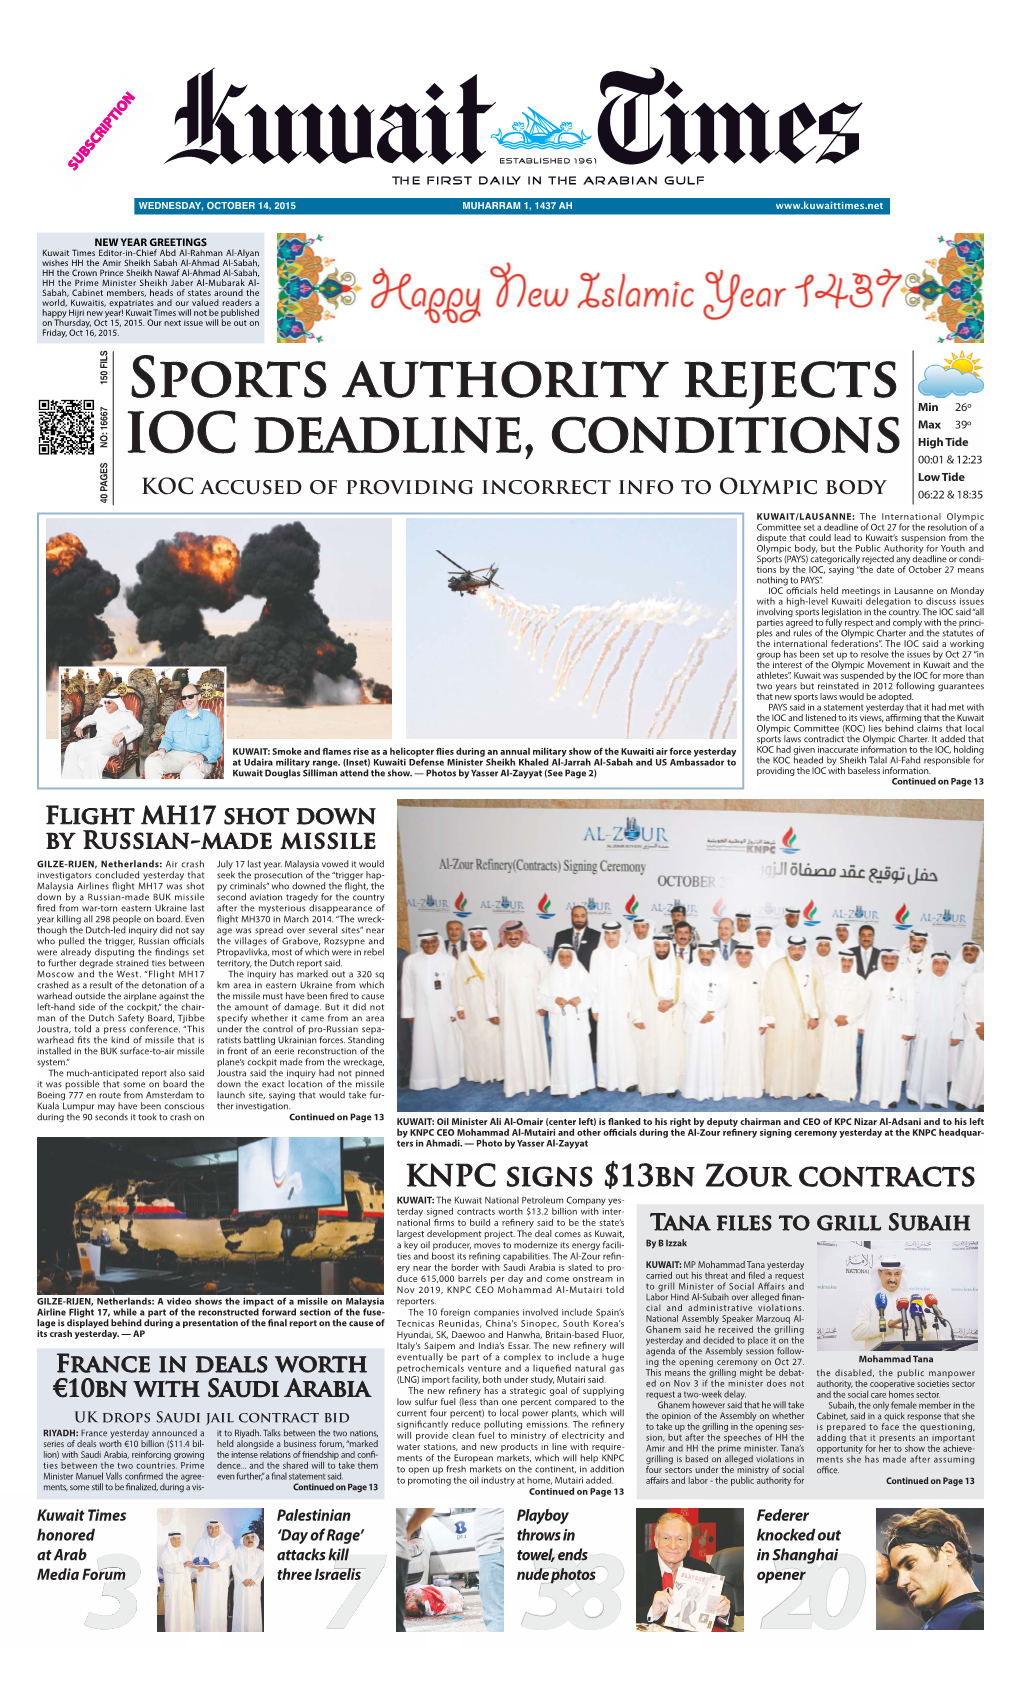 Sports Authority Rejects IOC Deadline, Conditions